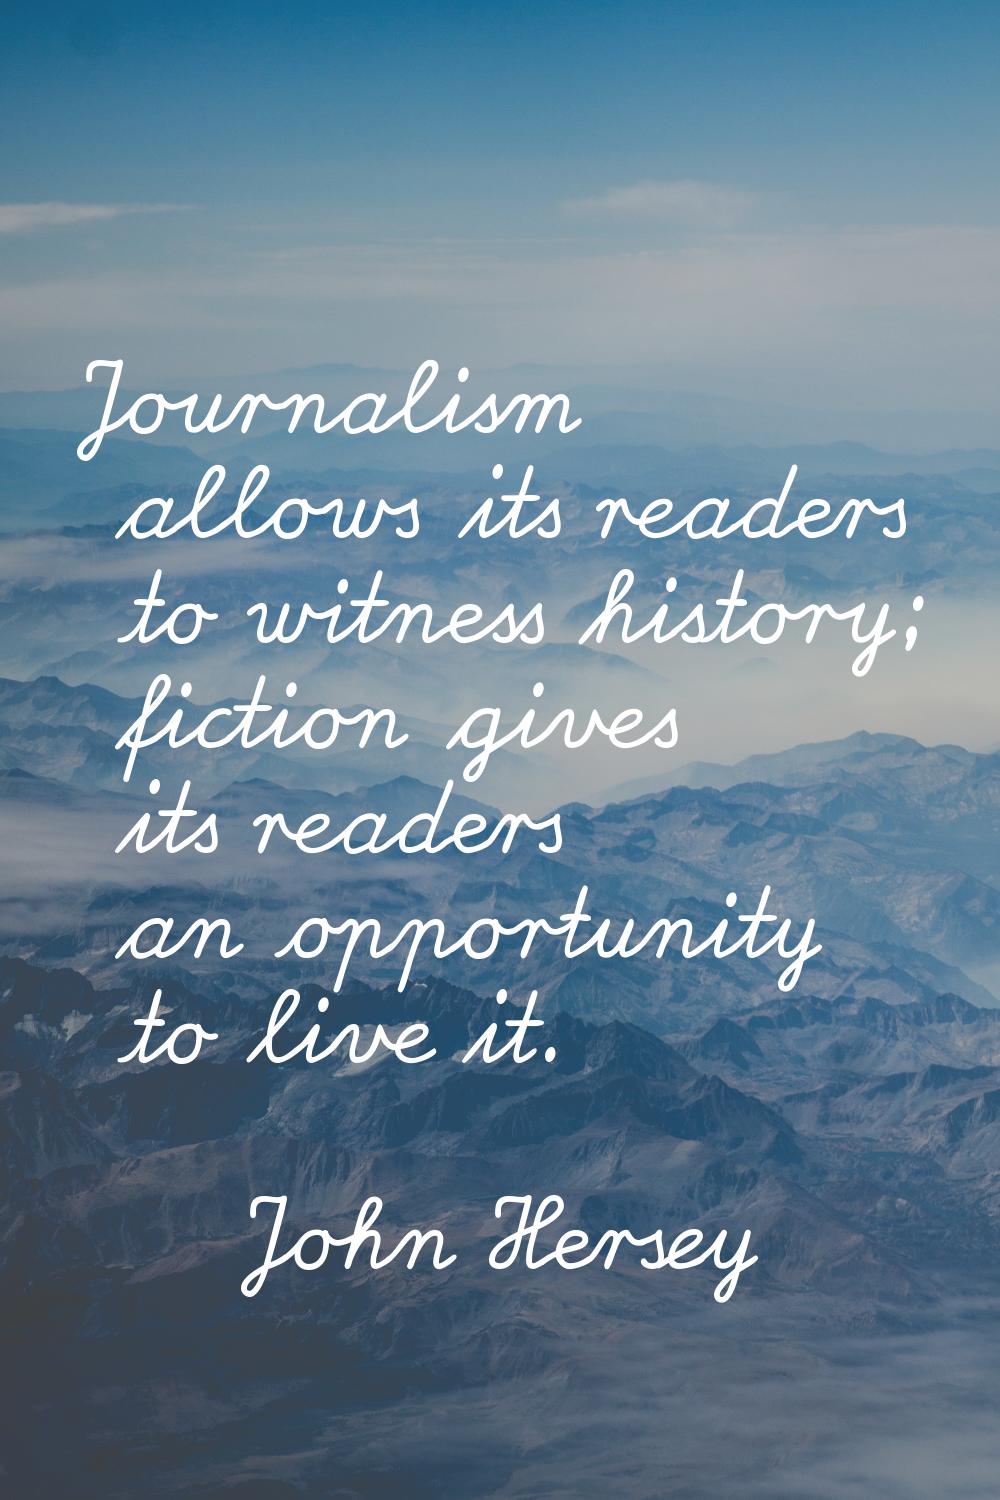 Journalism allows its readers to witness history; fiction gives its readers an opportunity to live 